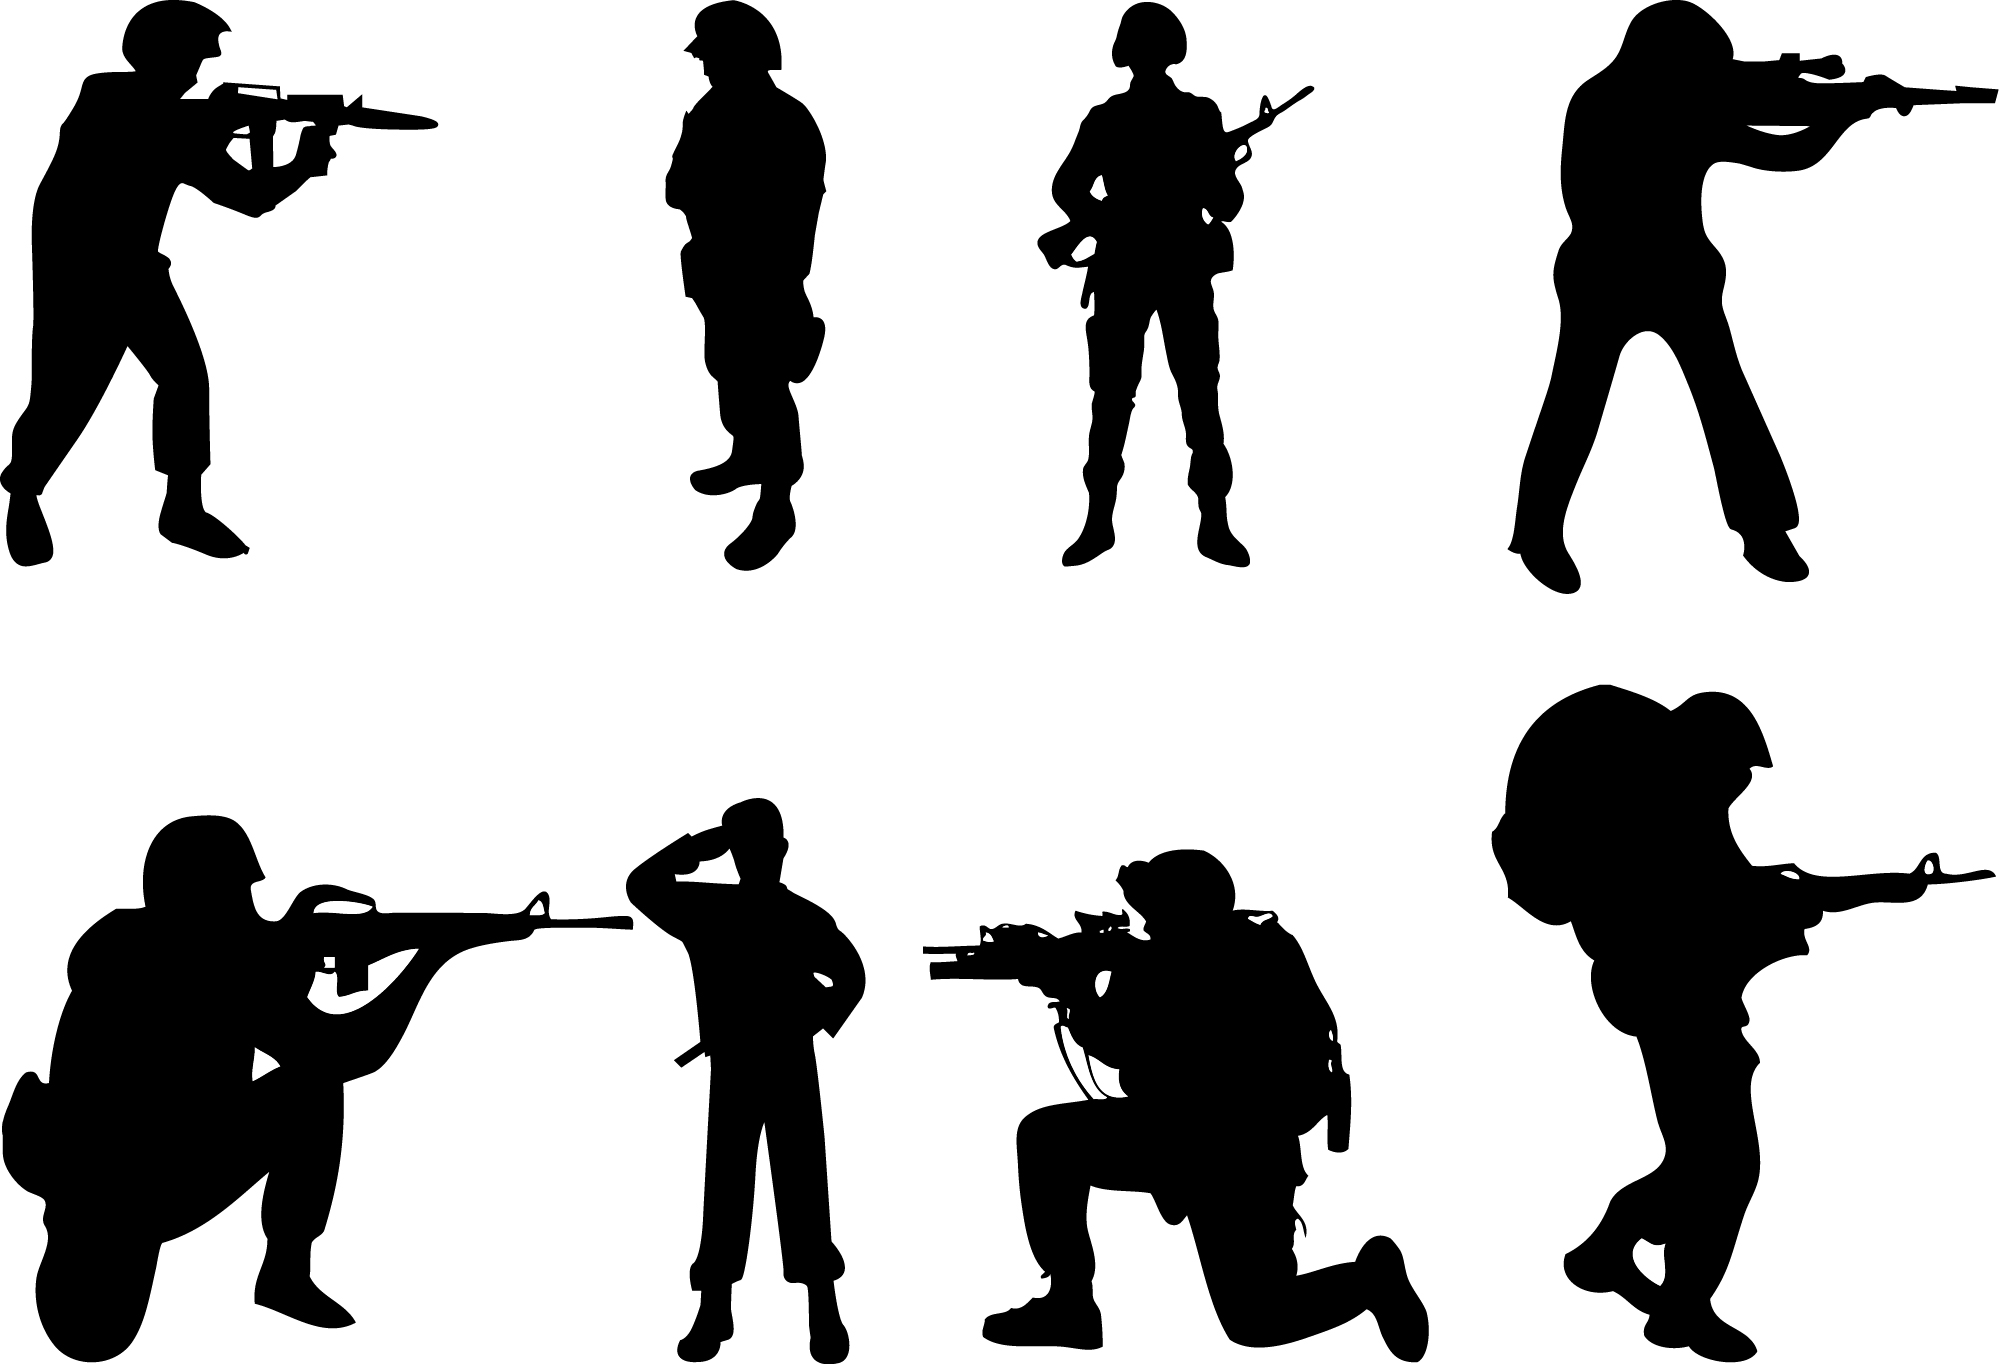 soldier Stock Illustrationby 